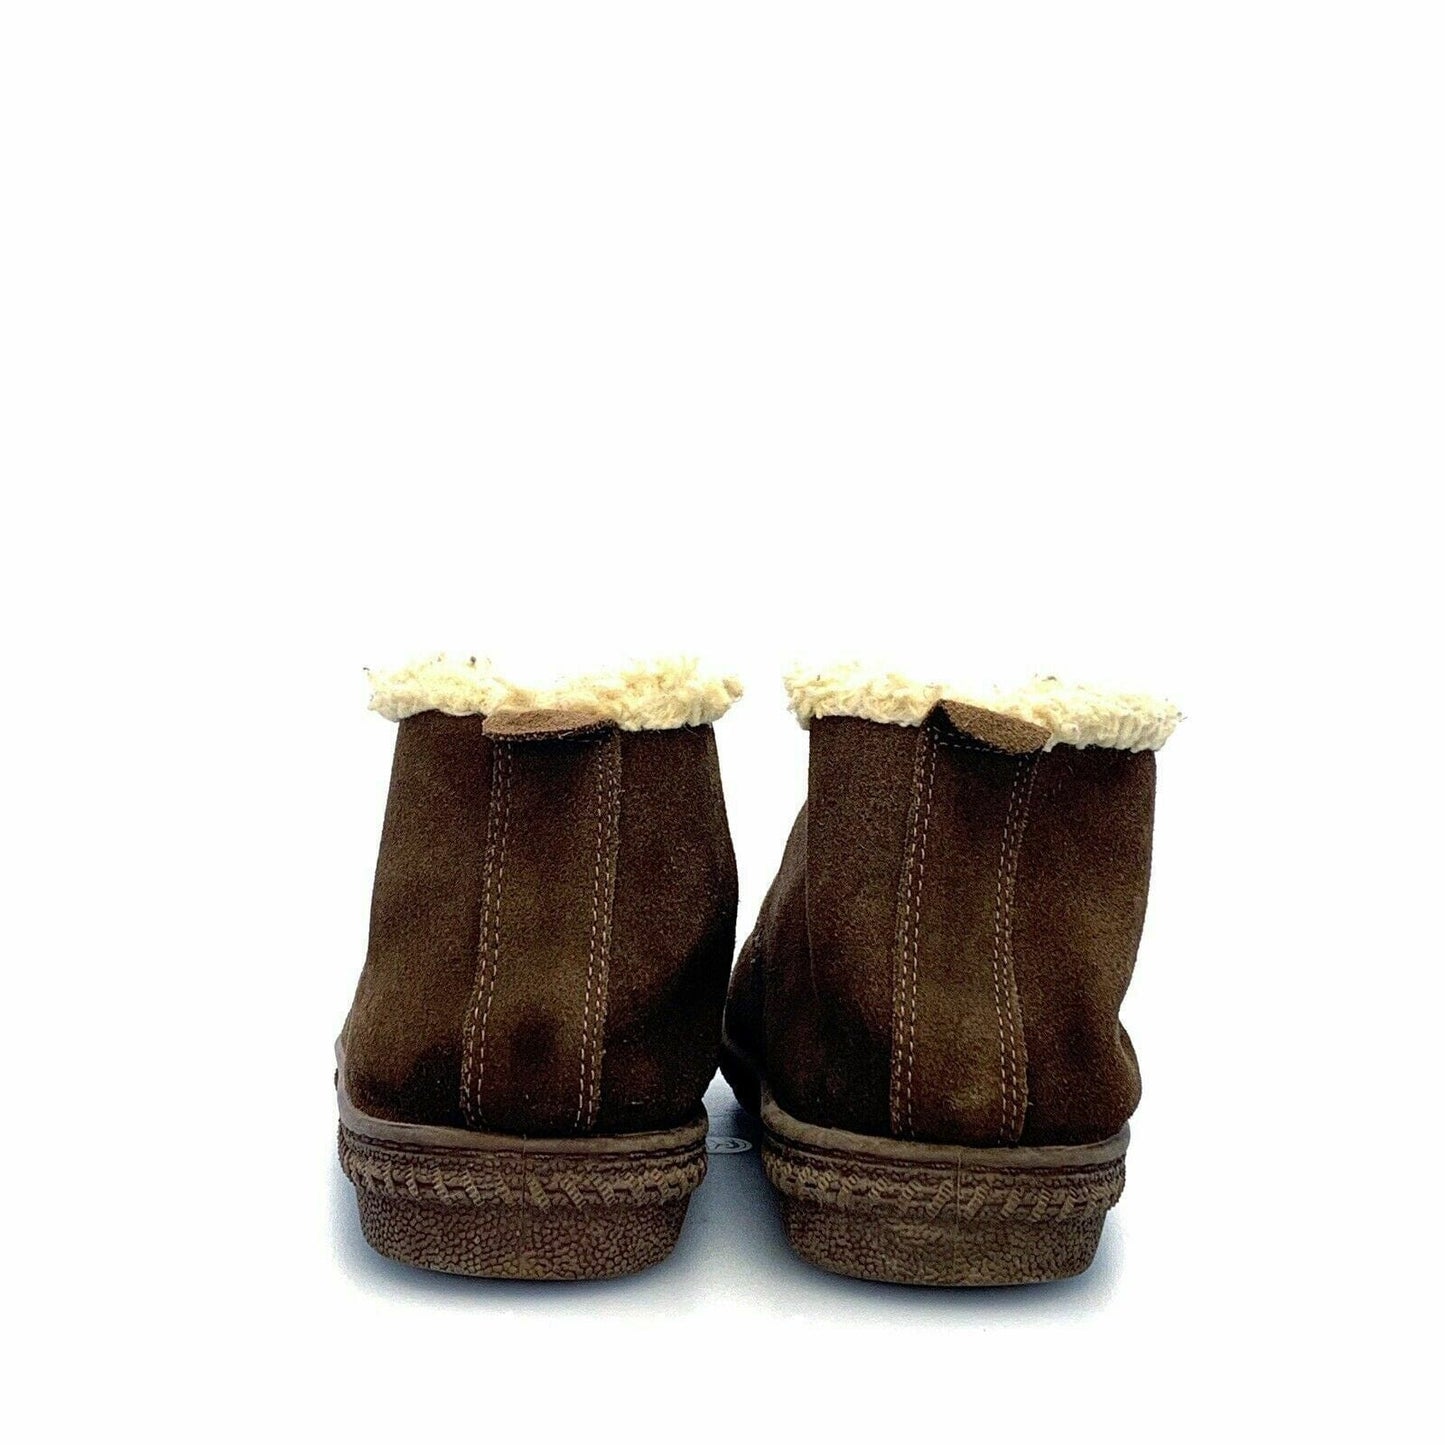 Footwarmers by Laguna Ankle Boots Lined Brown Faux Fur Slip On Shoes Size 8 - parsimonyshoppes